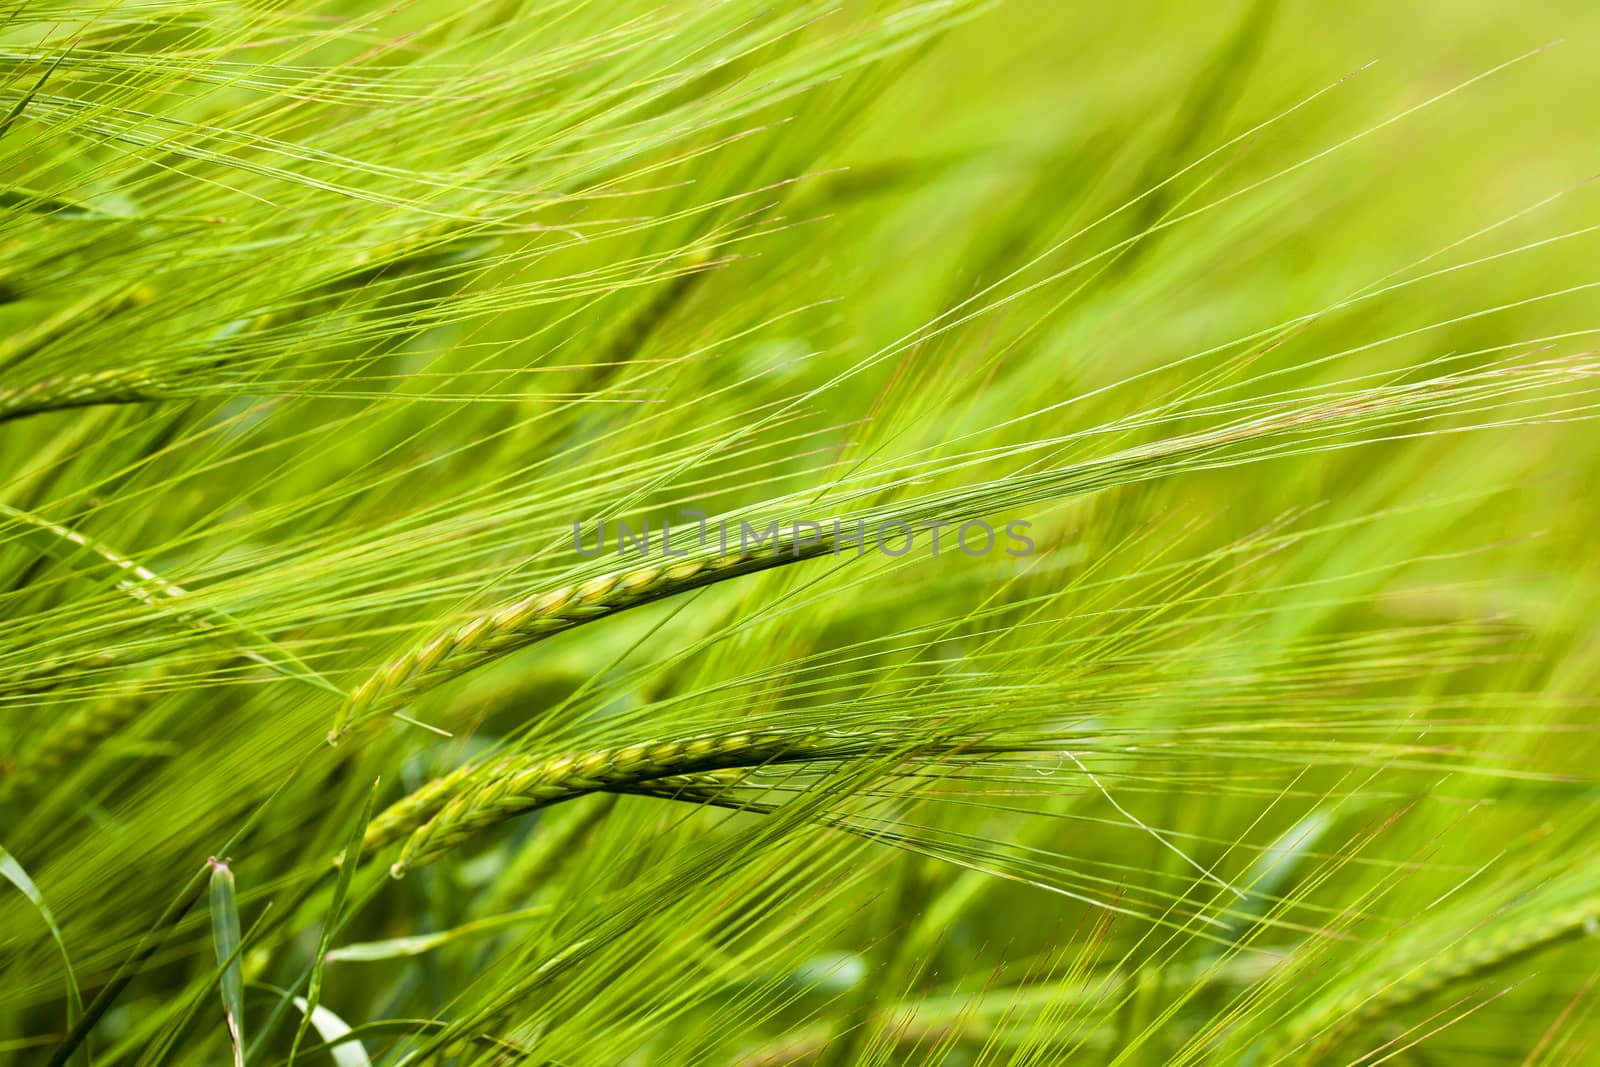   ears of the green unripe wheat photographed by a close up